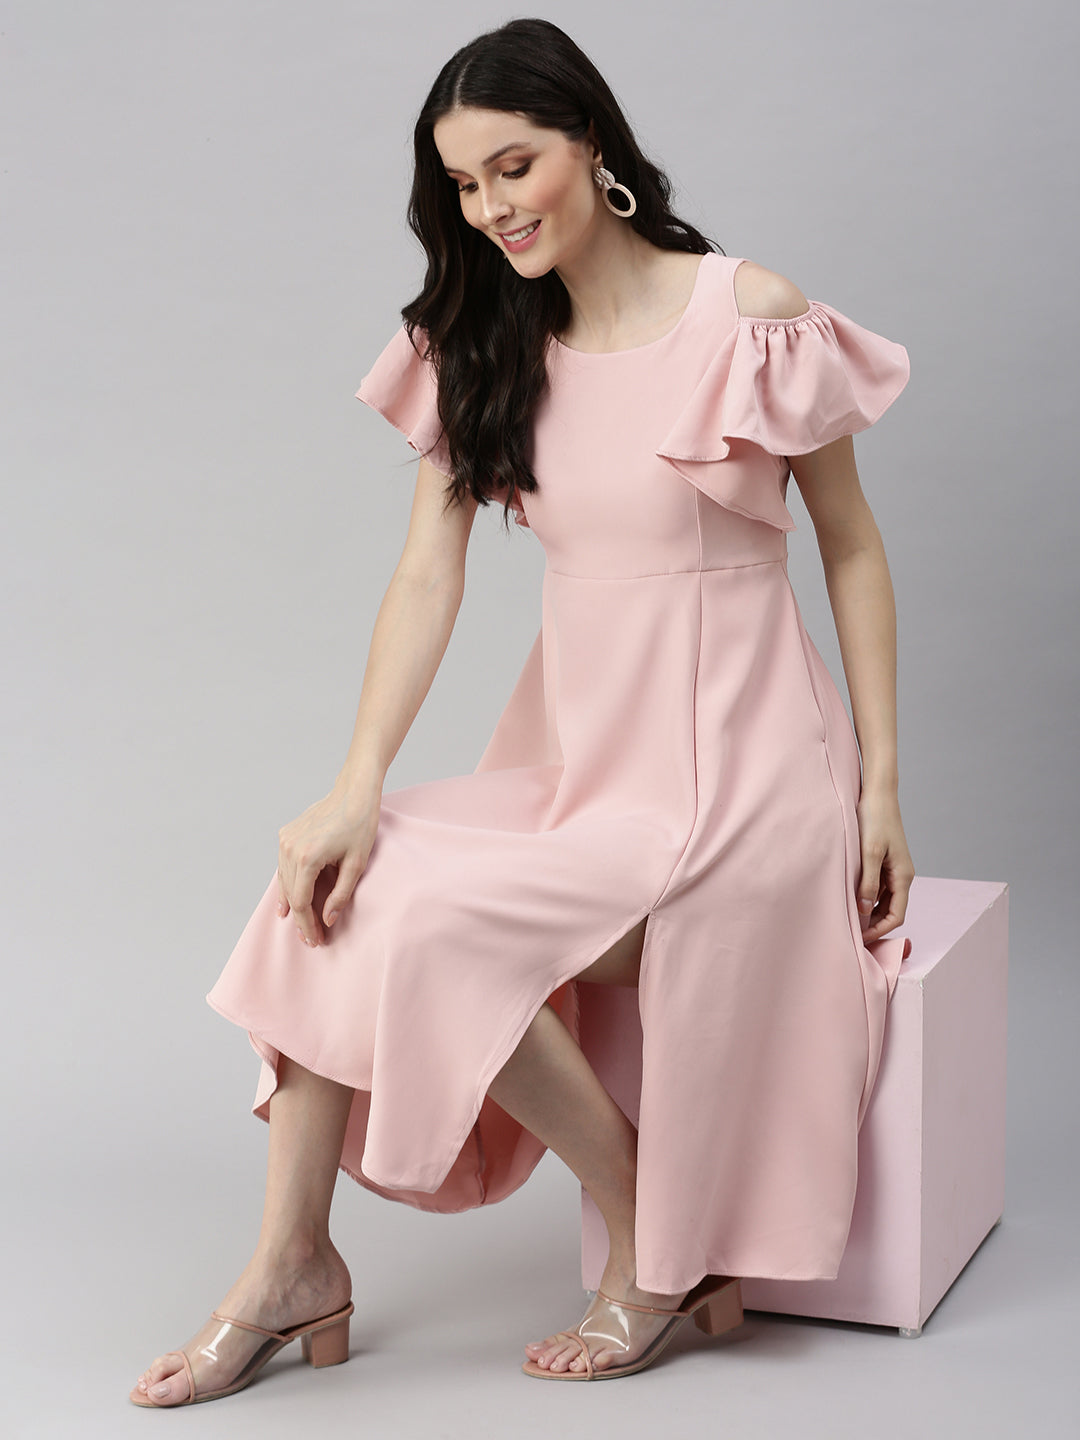 Women Solid Fit and Flare Pink Dress